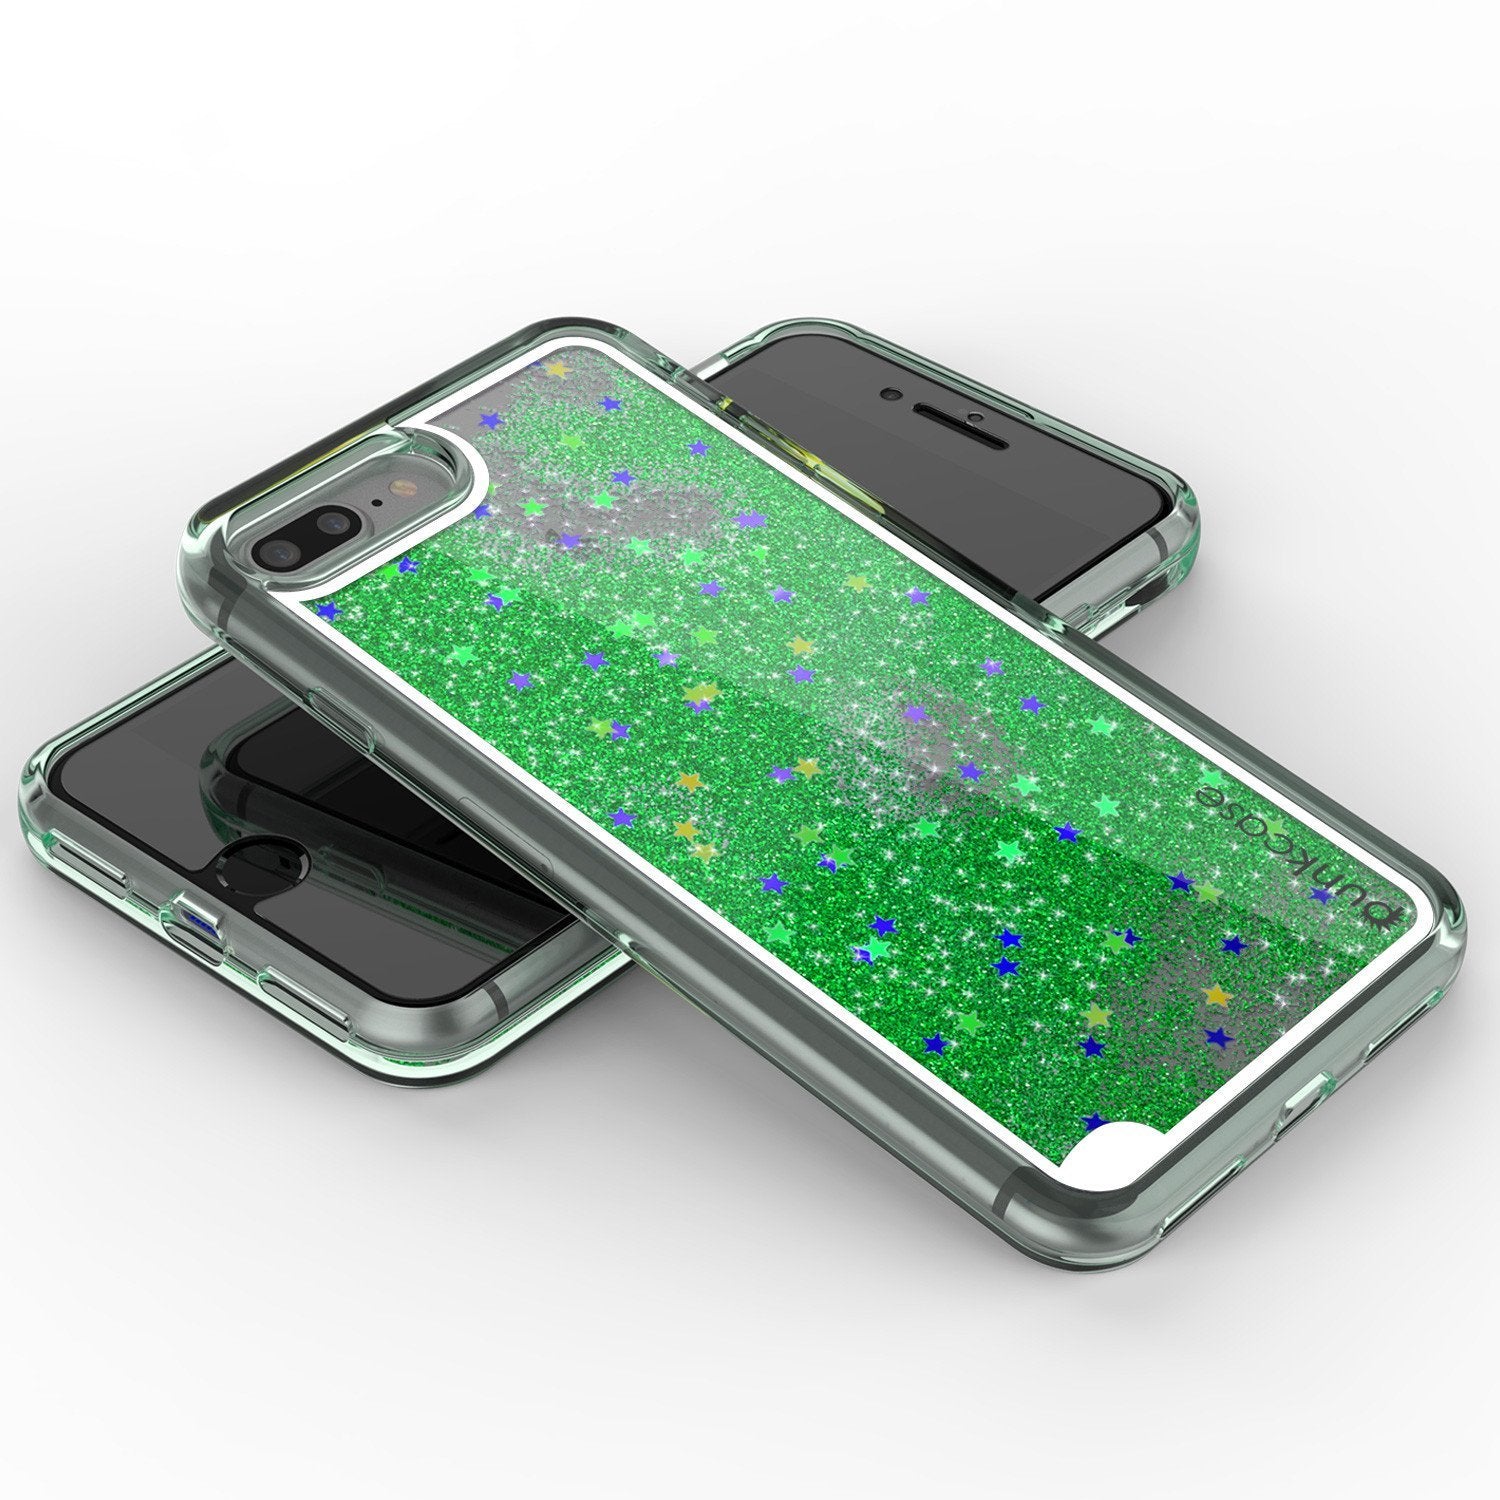 iPhone 8+ Plus Case, PunkCase LIQUID Green Series, Protective Dual Layer Floating Glitter Cover